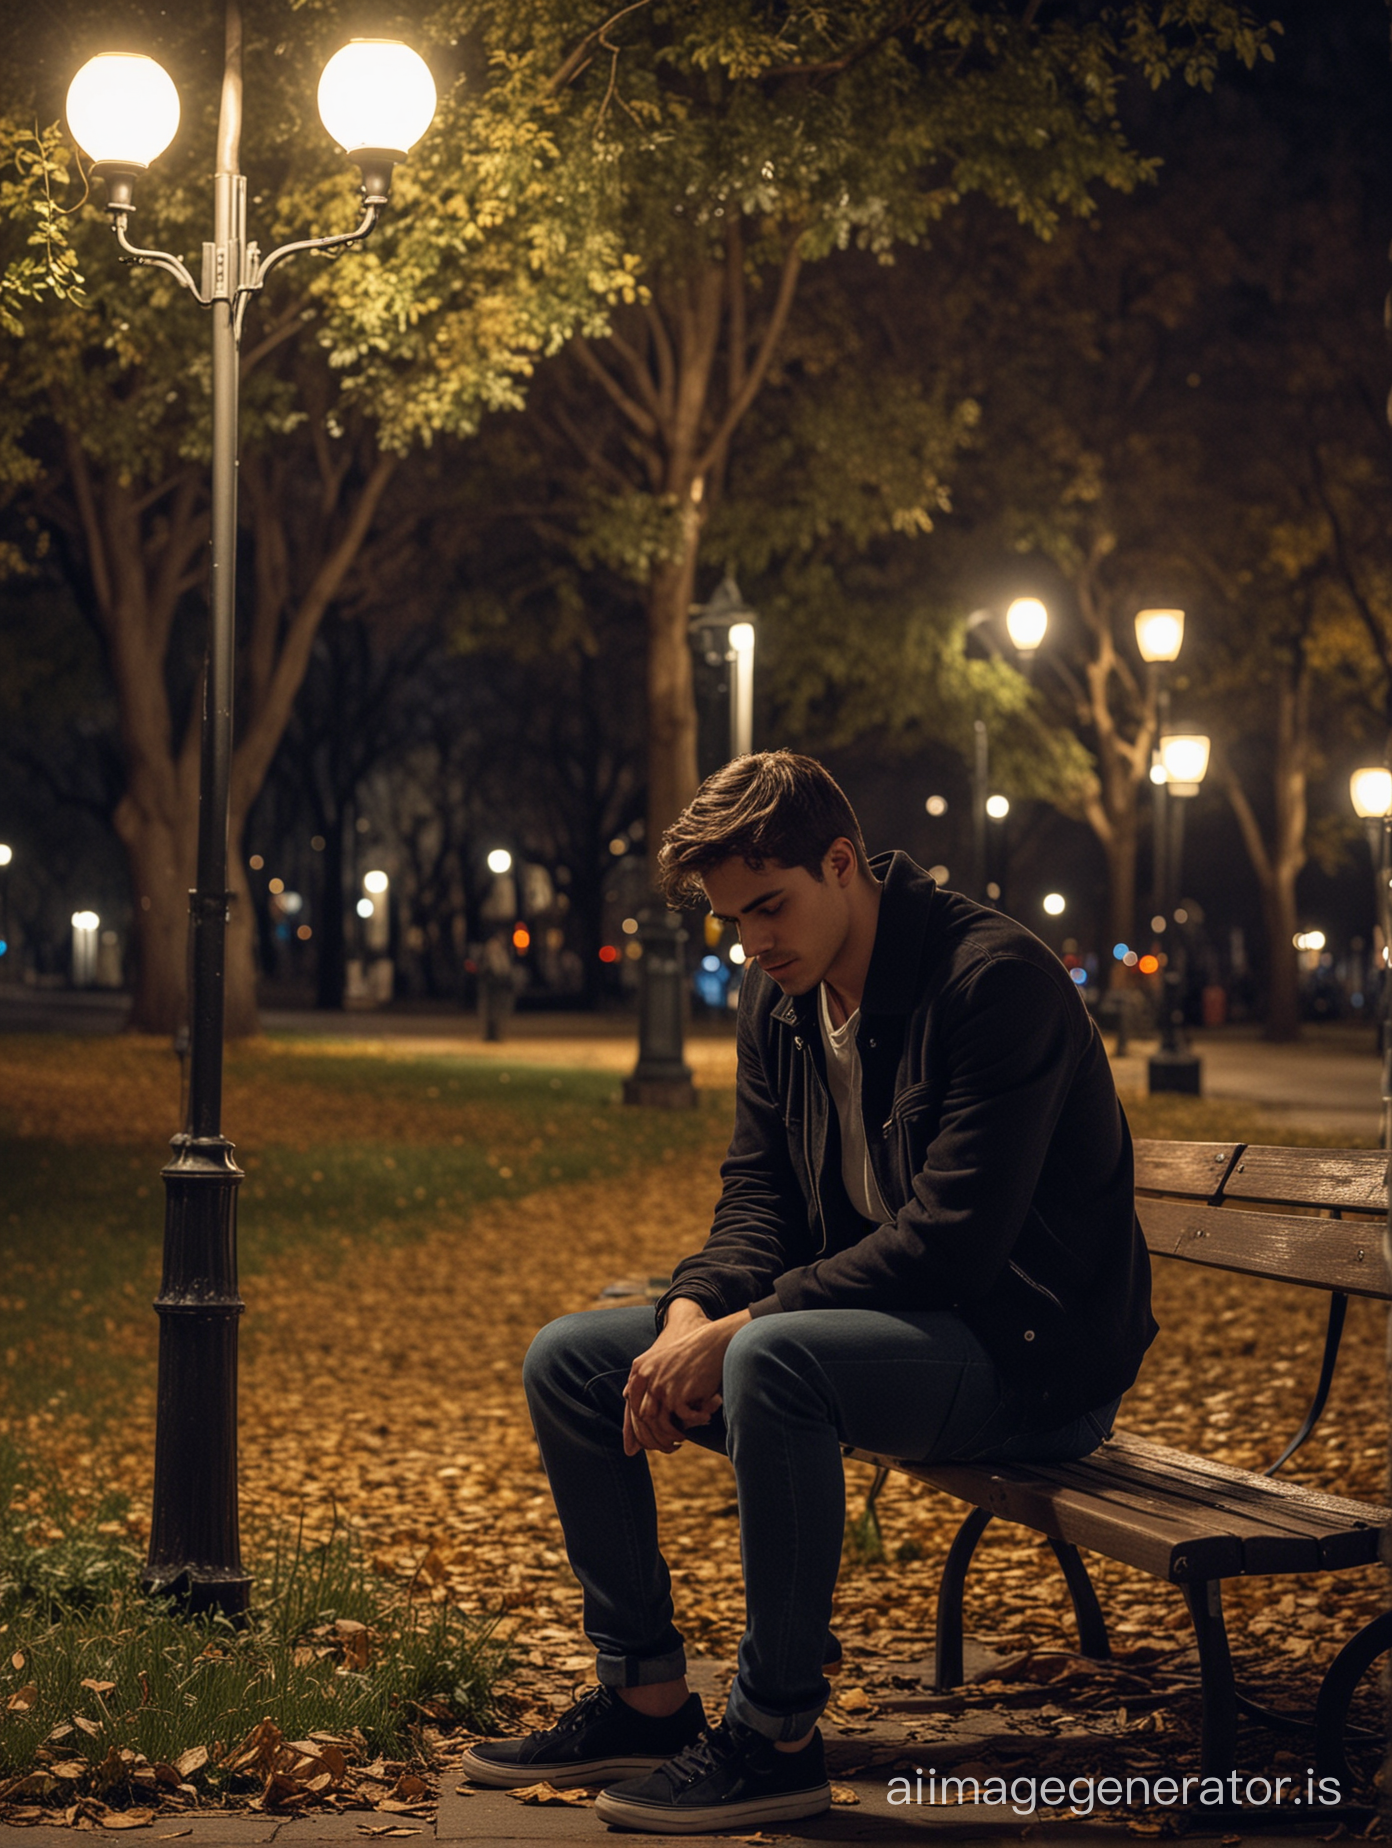 A  23 handsome guy sitting alone in a park at night, lamp lights, he look sad 